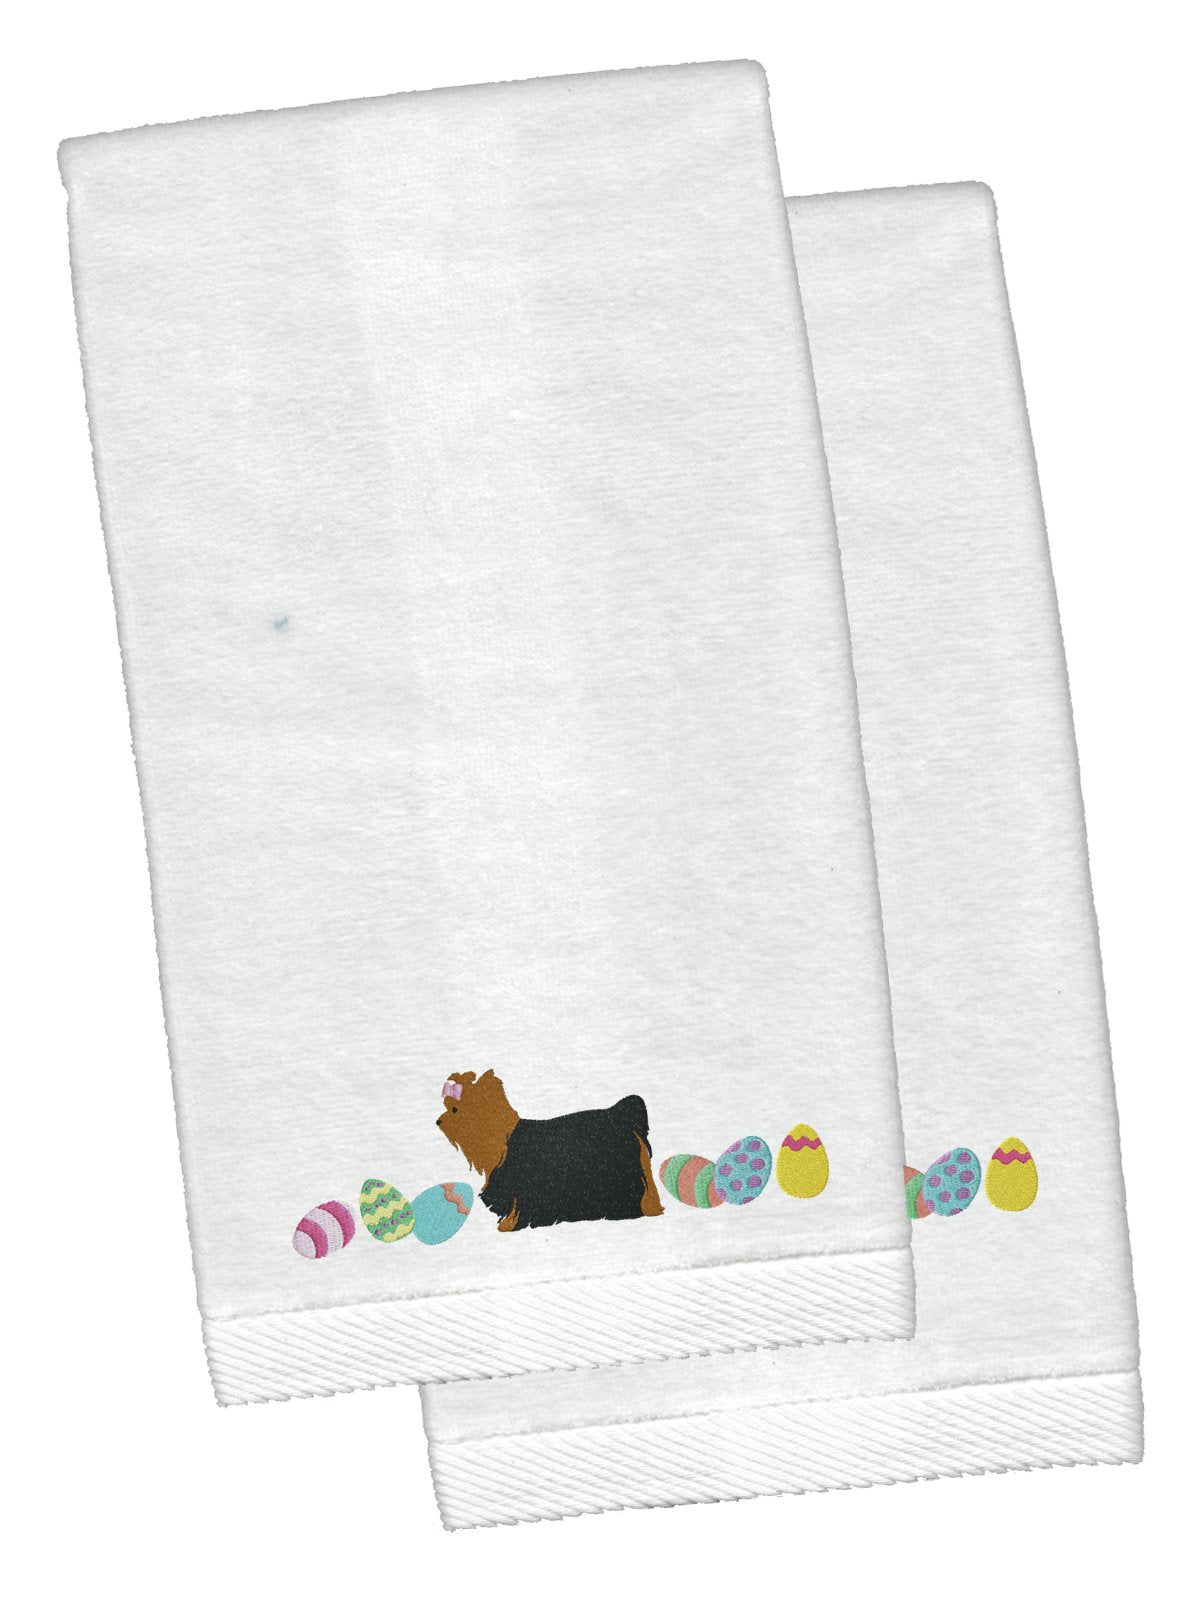 Yorkie Yorkshire Terrier Easter White Embroidered Plush Hand Towel Set of 2 CK1695KTEMB by Caroline's Treasures